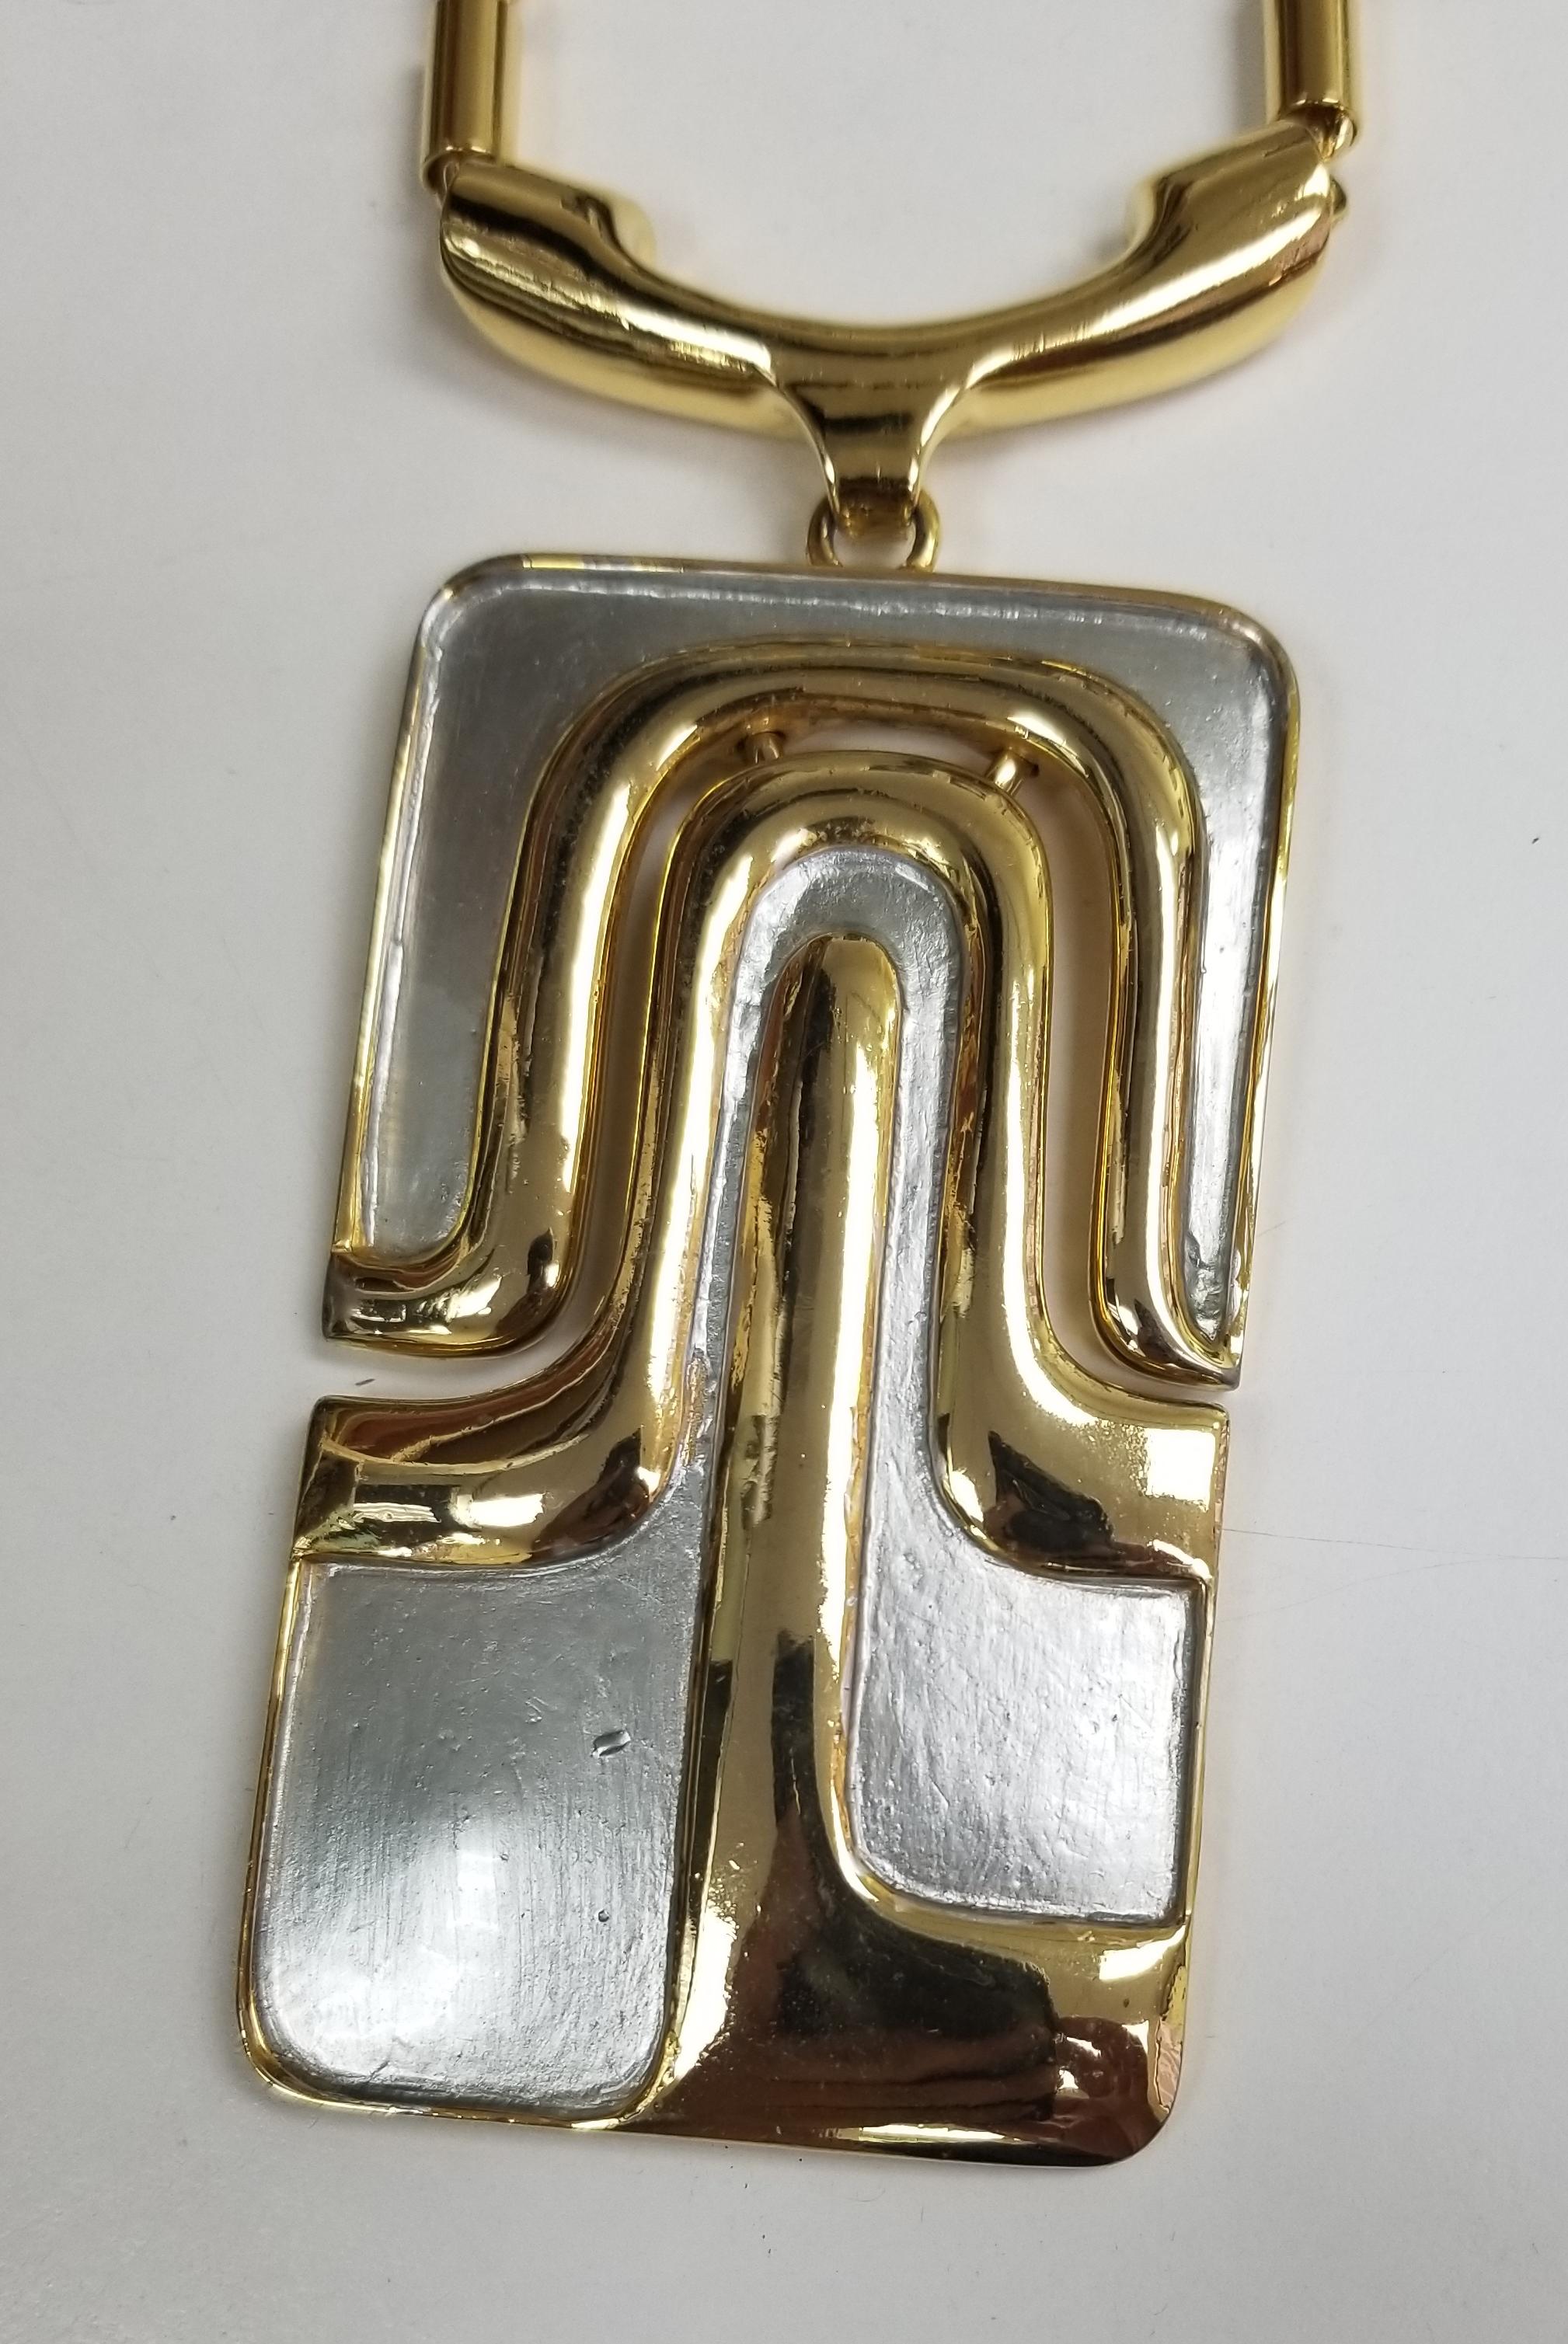 Pierre Cardin vintage modern gold and white tone metal necklace.  Pendant measures almost 5